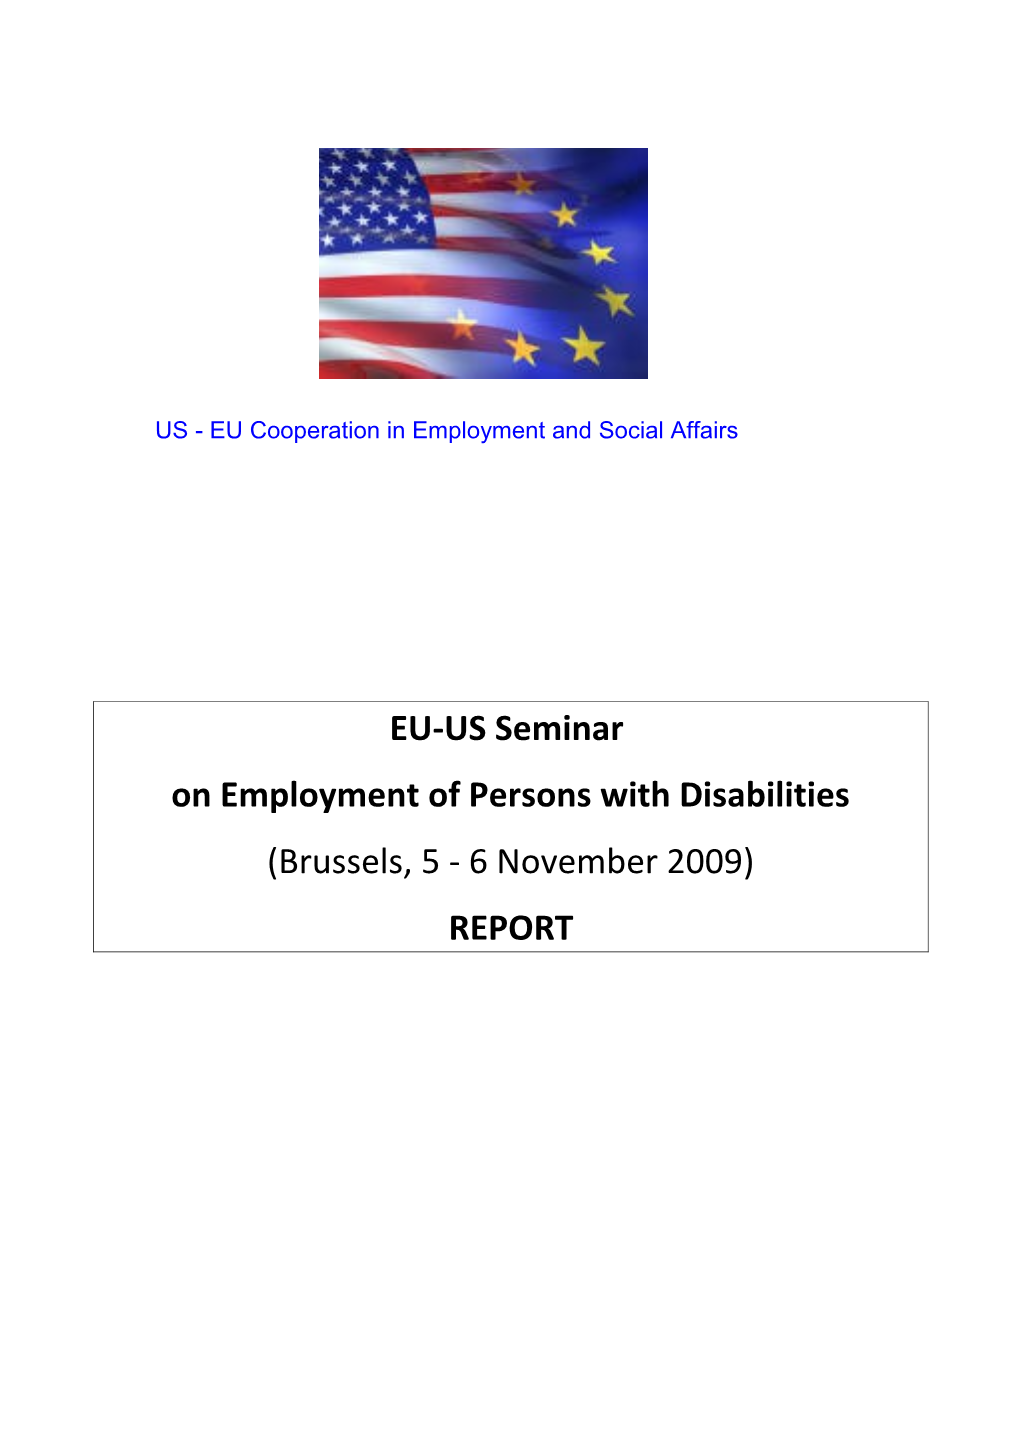 US-EU Cooperation in Employment and Social Affairs